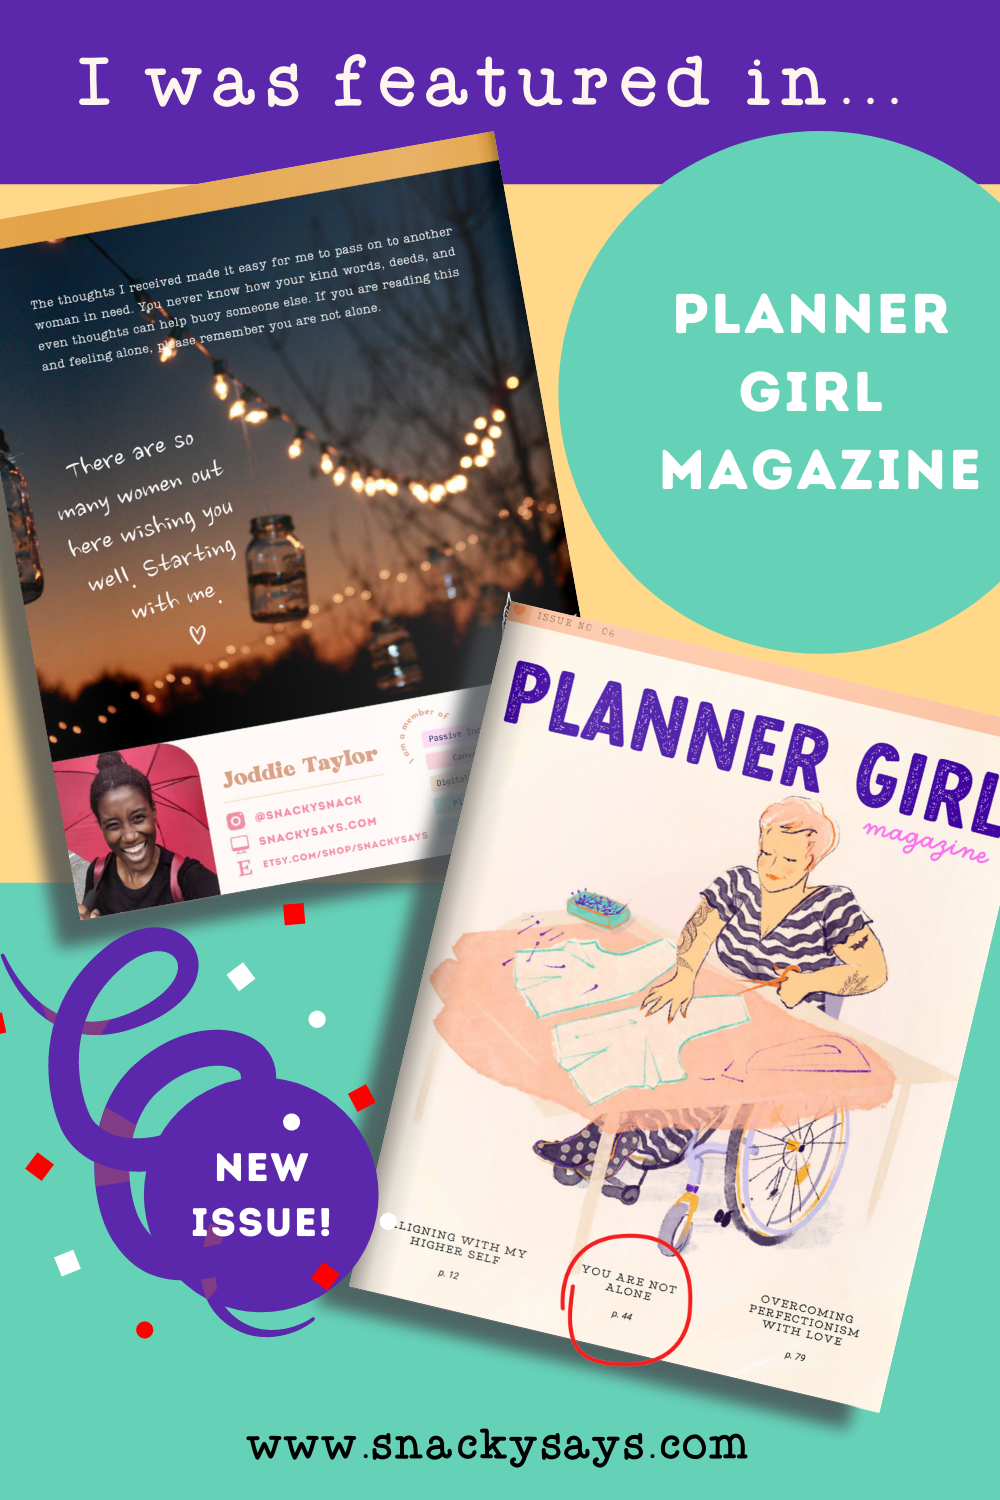 You Are Not Alone - My Feature in Planner Girl Magazine - SnackySays